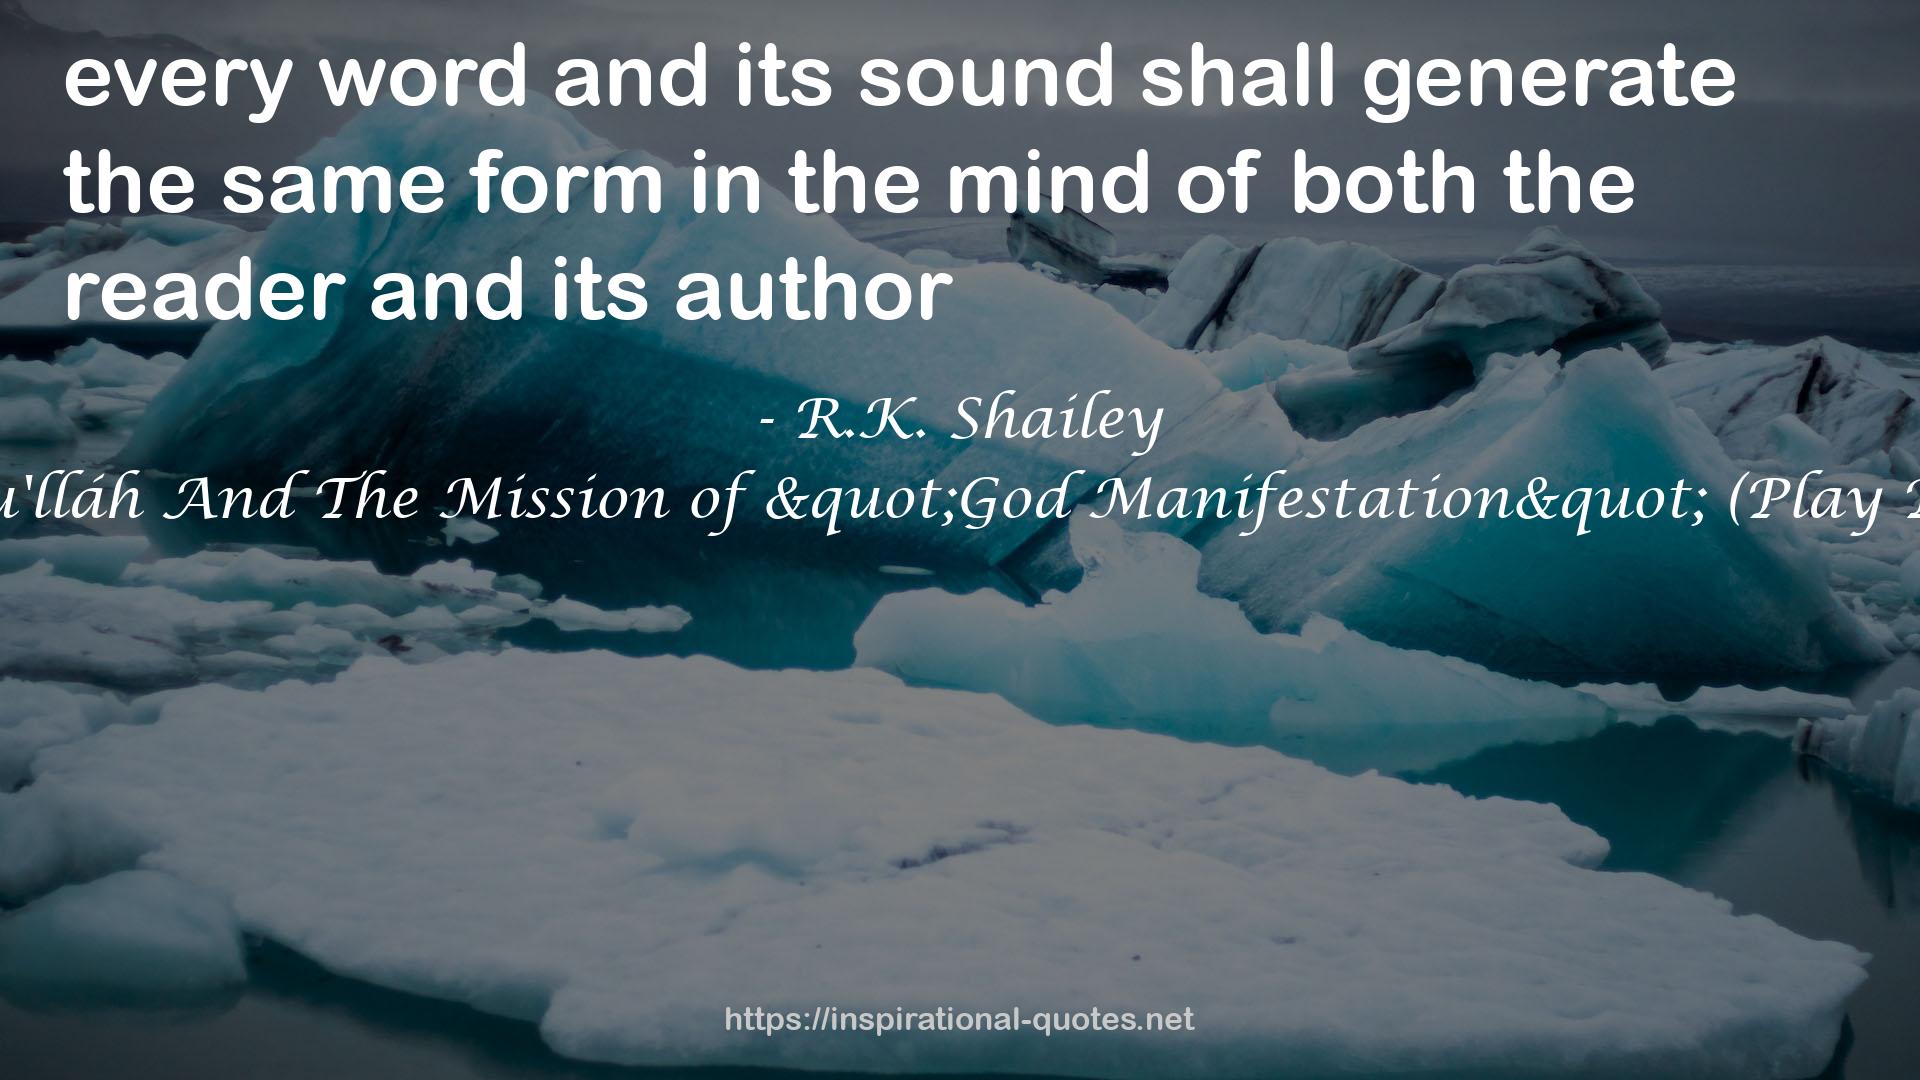 R.K. Shailey QUOTES